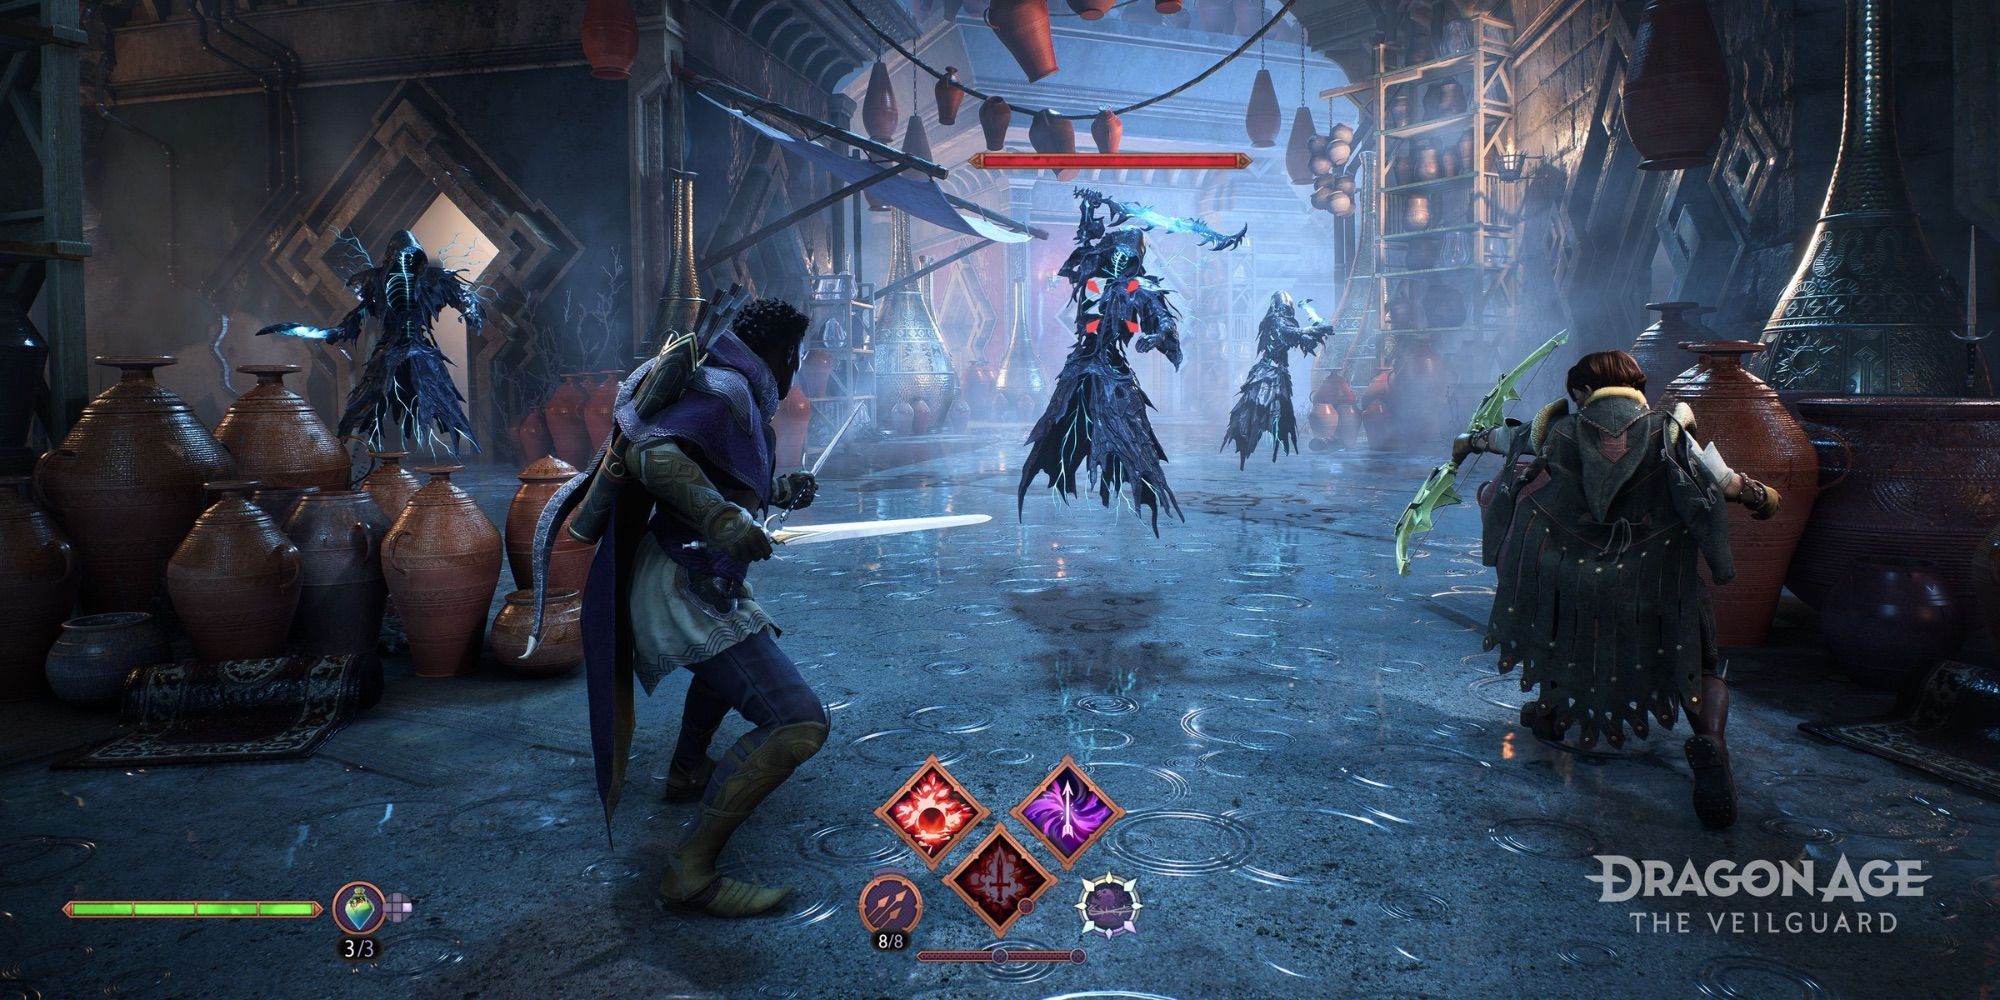 A player attacking demons in Dragon Age: The Veilguard